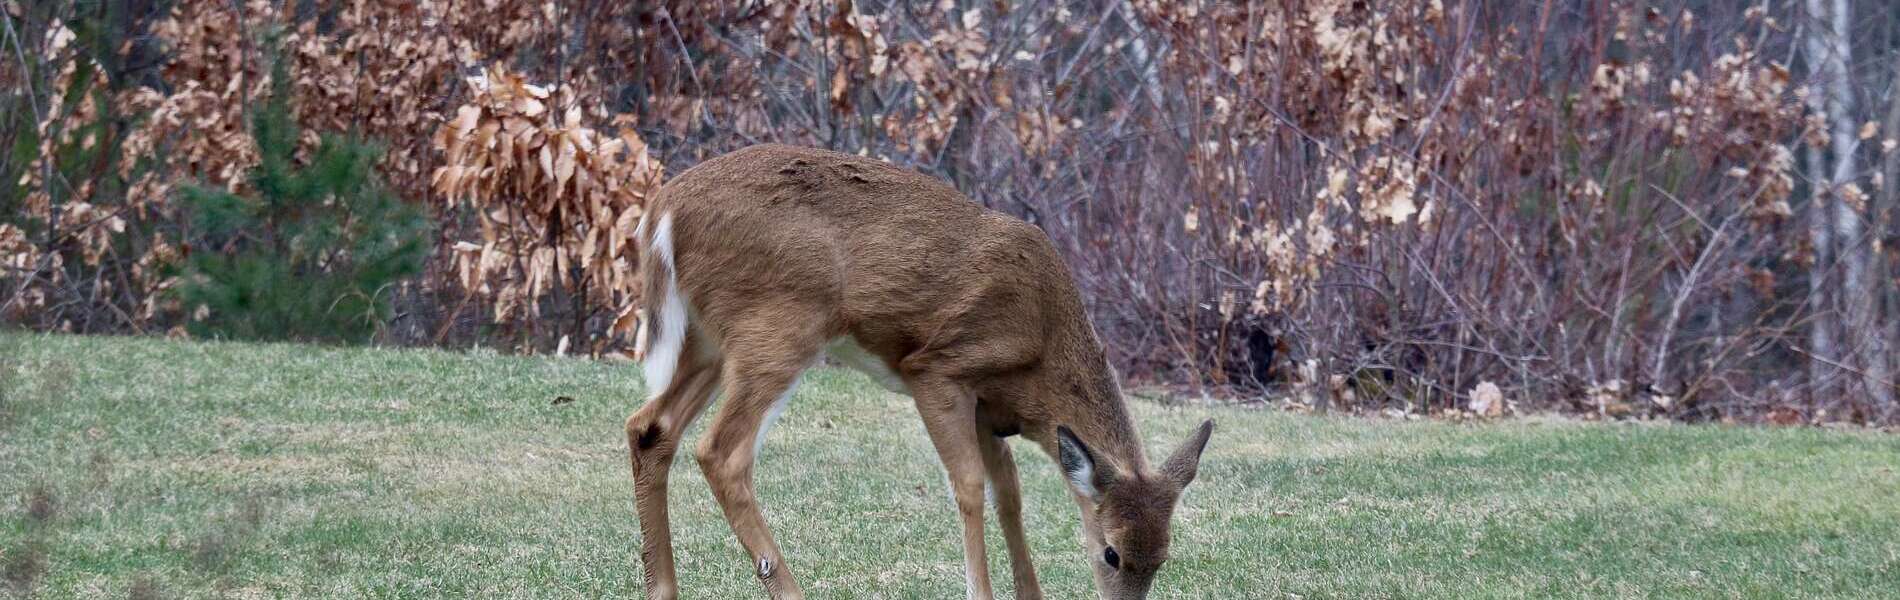 A lone deer grazing on a lawn